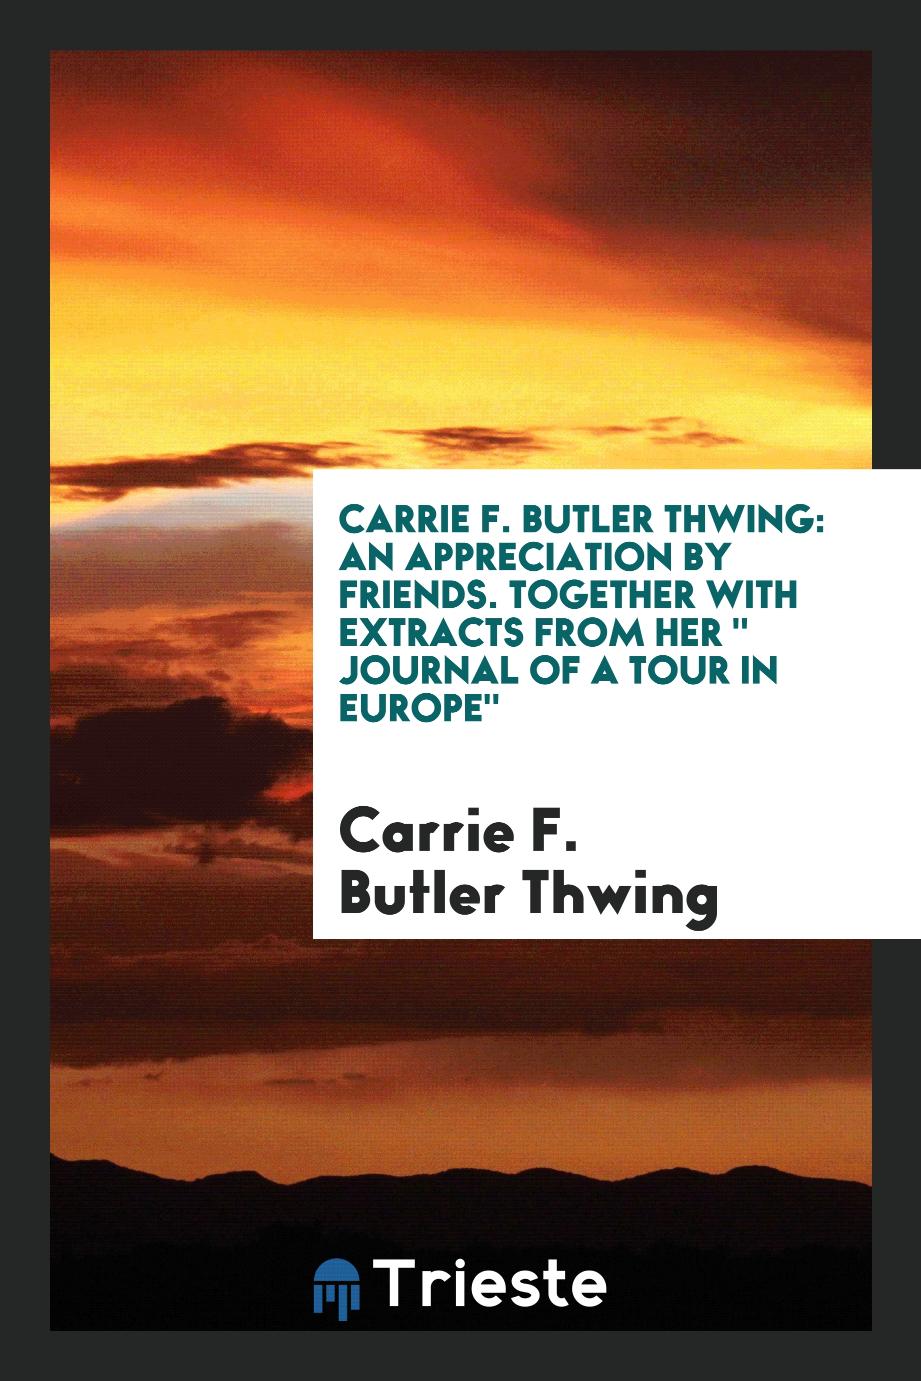 Carrie F. Butler Thwing: An Appreciation by Friends. Together with Extracts from Her " Journal of a Tour in Europe"